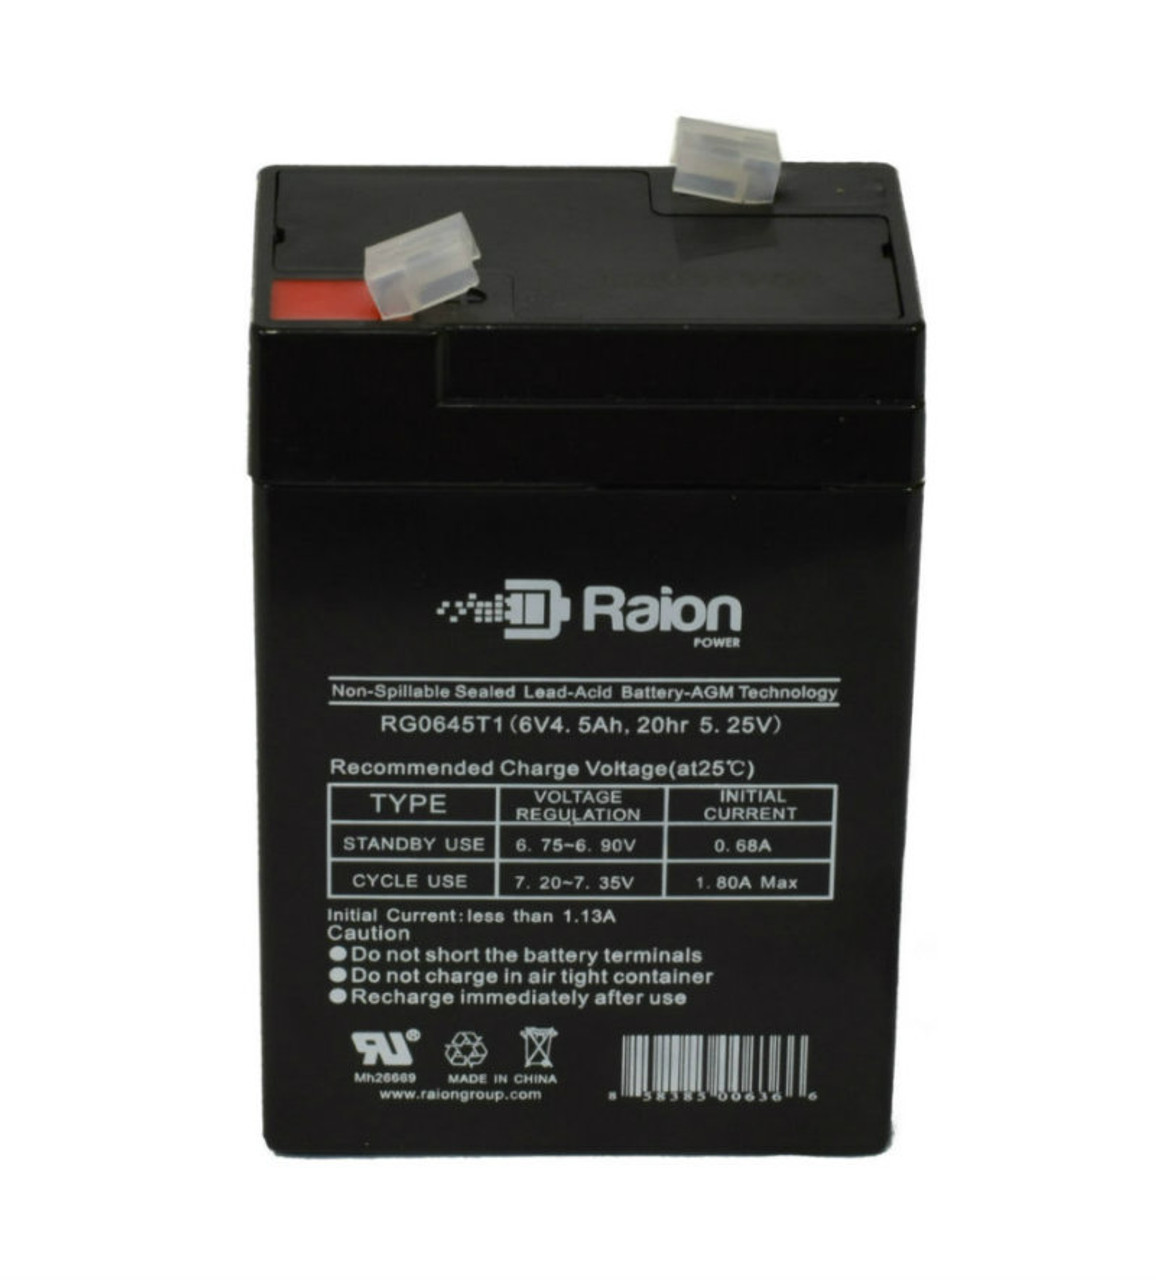 Raion Power RG0645T1 Replacement Battery Cartridge for POWERGOR SB6-5